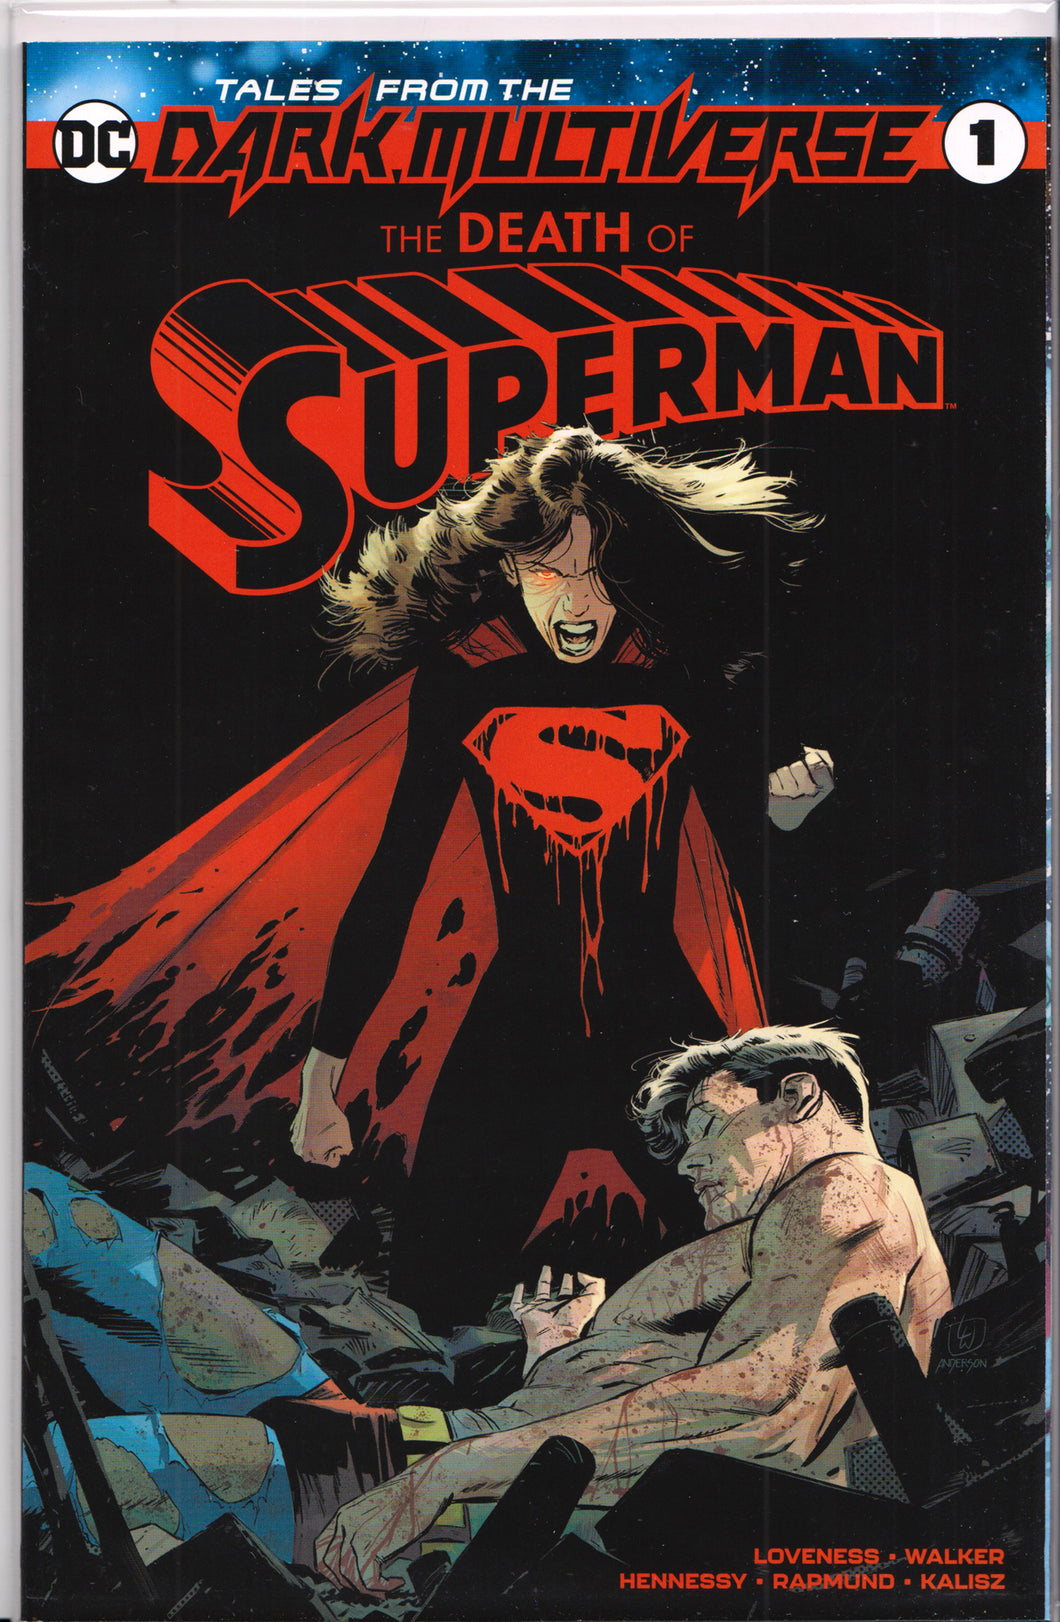 TALES FROM THE DARK MULTIVERSE: THE DEATH OF SUPERMAN #1 COMIC BOOK ~ DC Comics